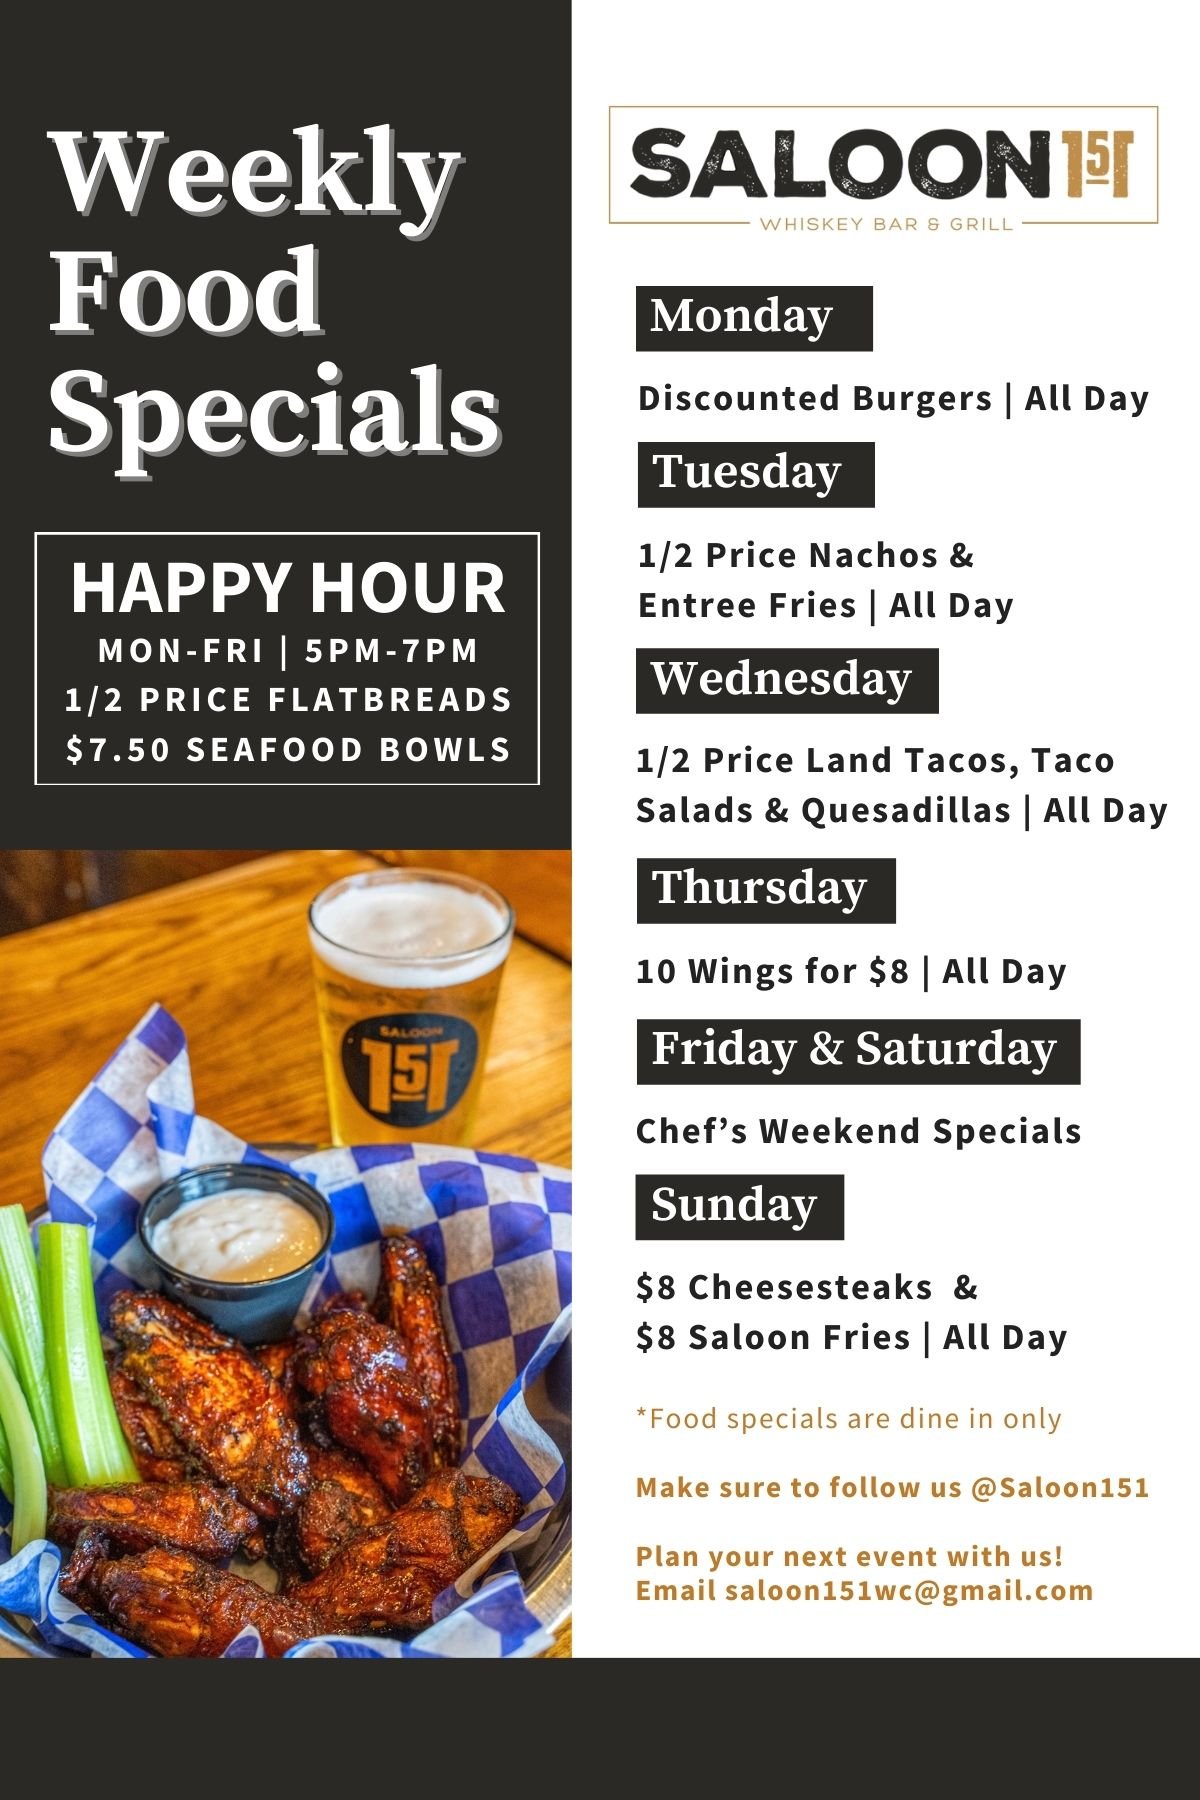 Discounted food specials